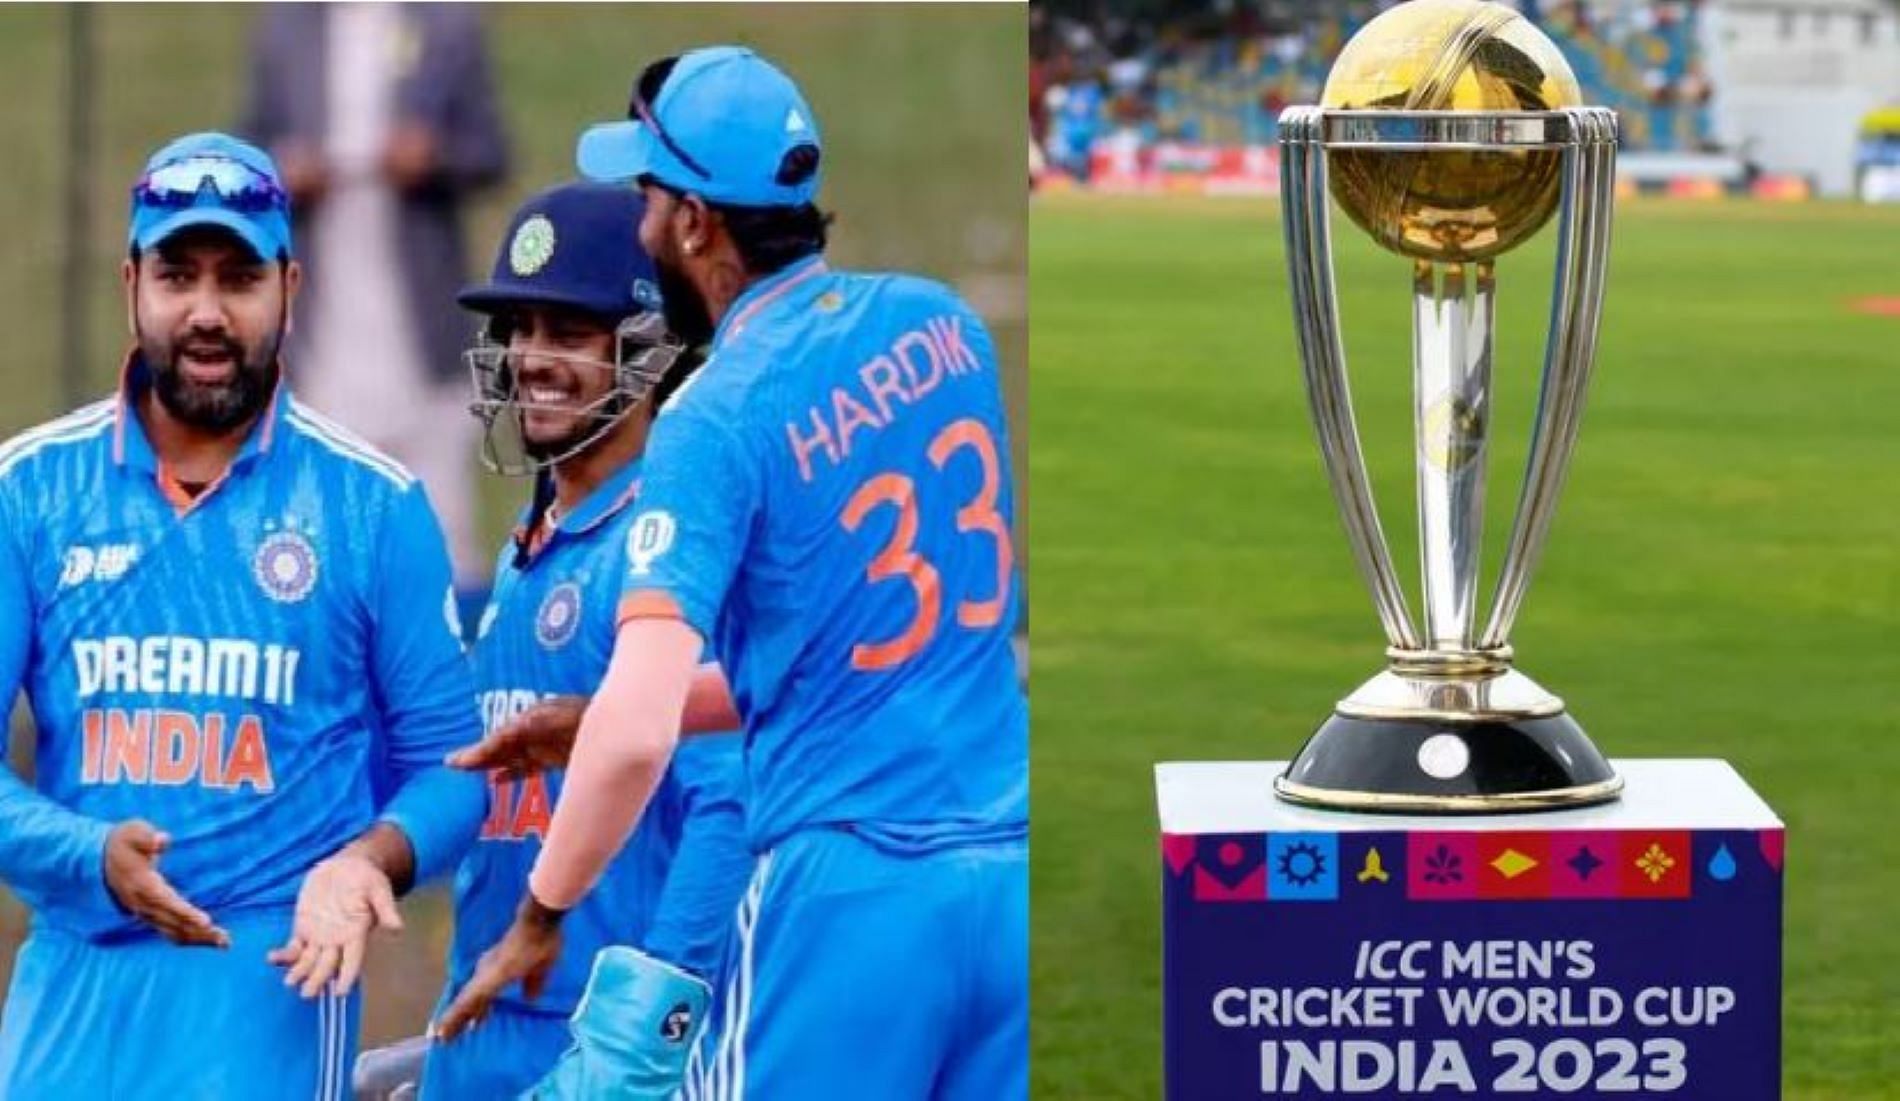 All eyes will be on Team India as they clash with Australia in their 2023 World Cup opener.